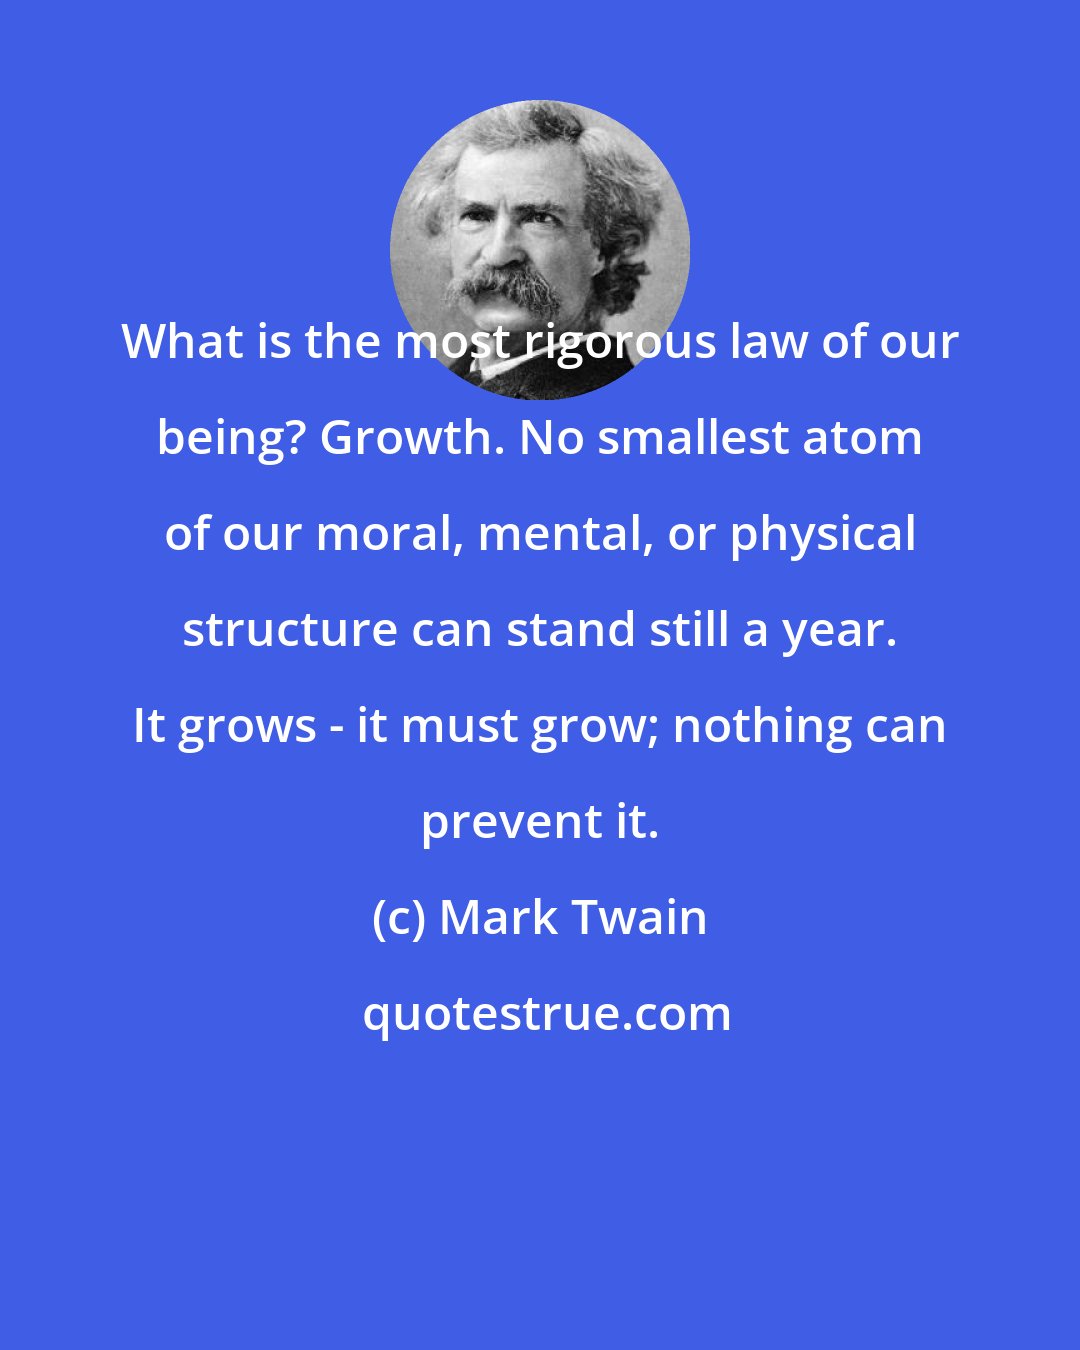 Mark Twain: What is the most rigorous law of our being? Growth. No smallest atom of our moral, mental, or physical structure can stand still a year. It grows - it must grow; nothing can prevent it.